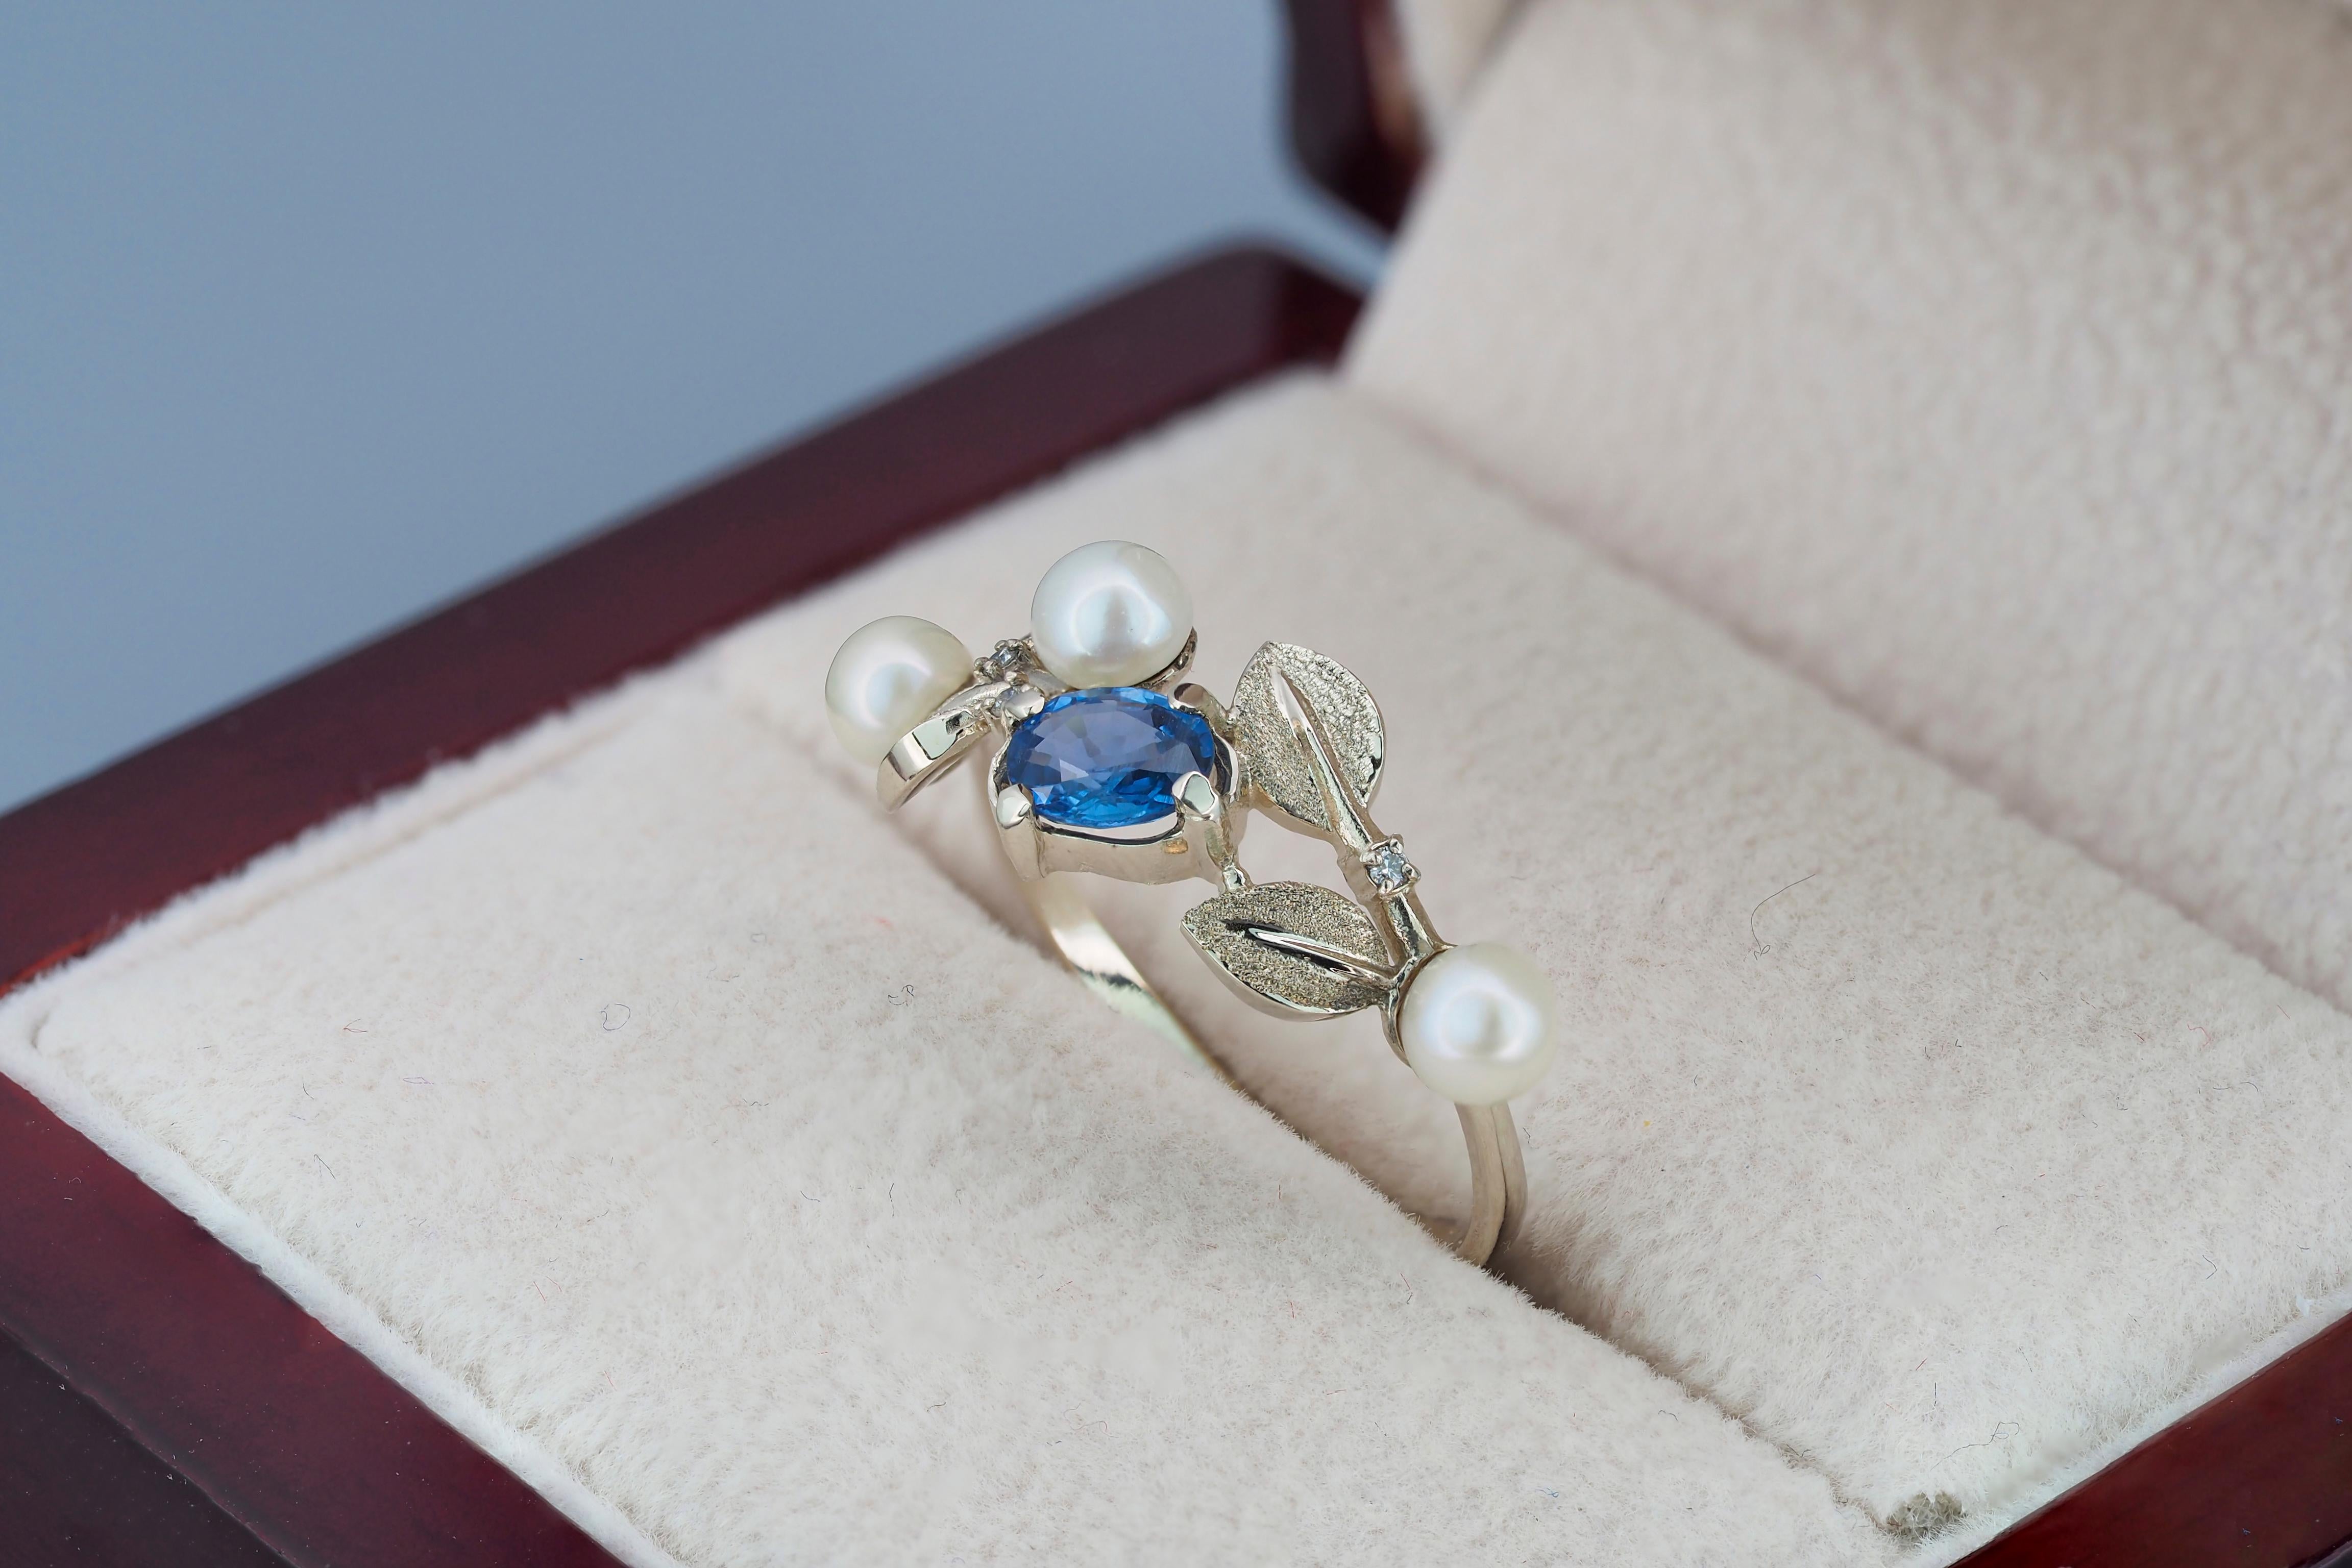 For Sale:  14k Gold Floral Ring with Sapphire, Diamonds and Pearls 6